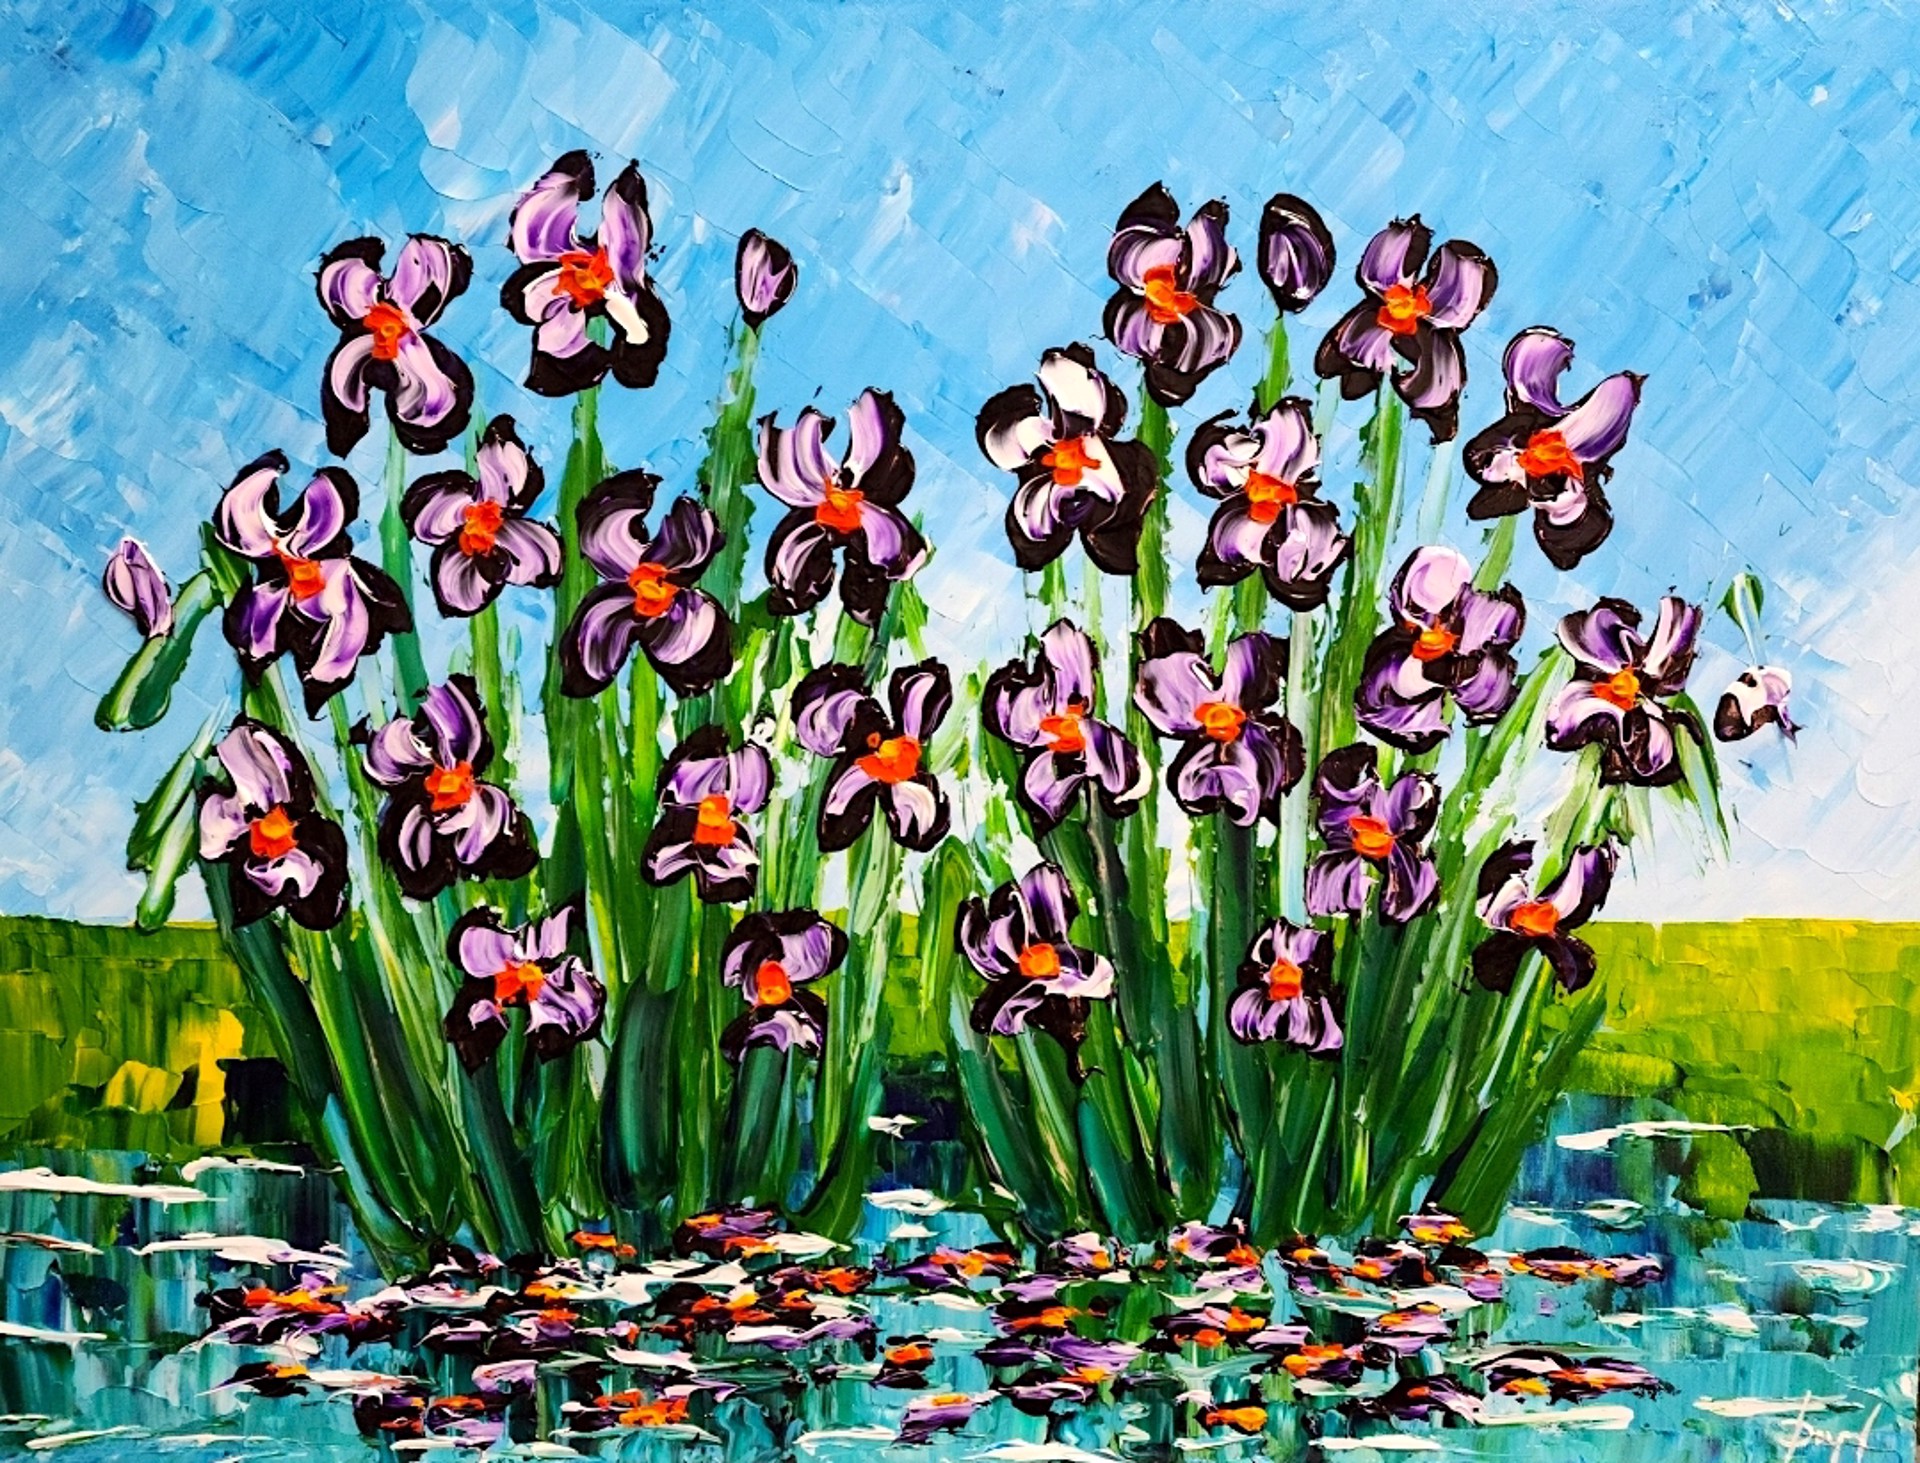 Irises of the Bright Springtime by Isabelle Dupuy